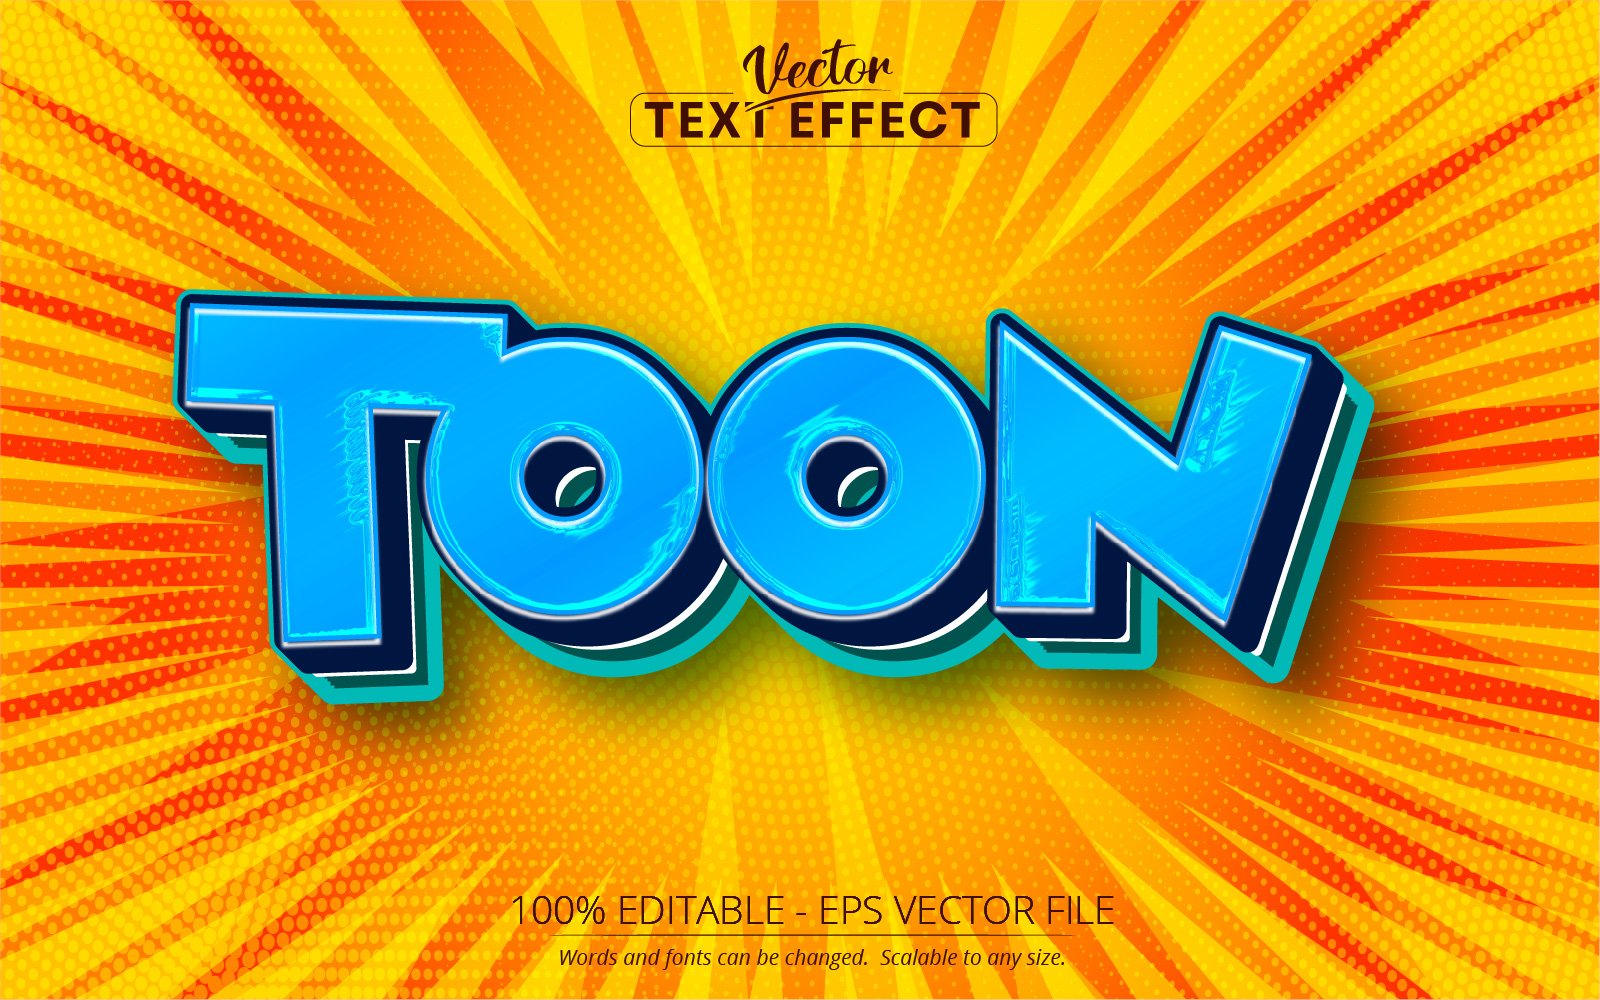 Toon - Editable Text Effect, Orange And Blue Comic Text Style, Graphics Illustration